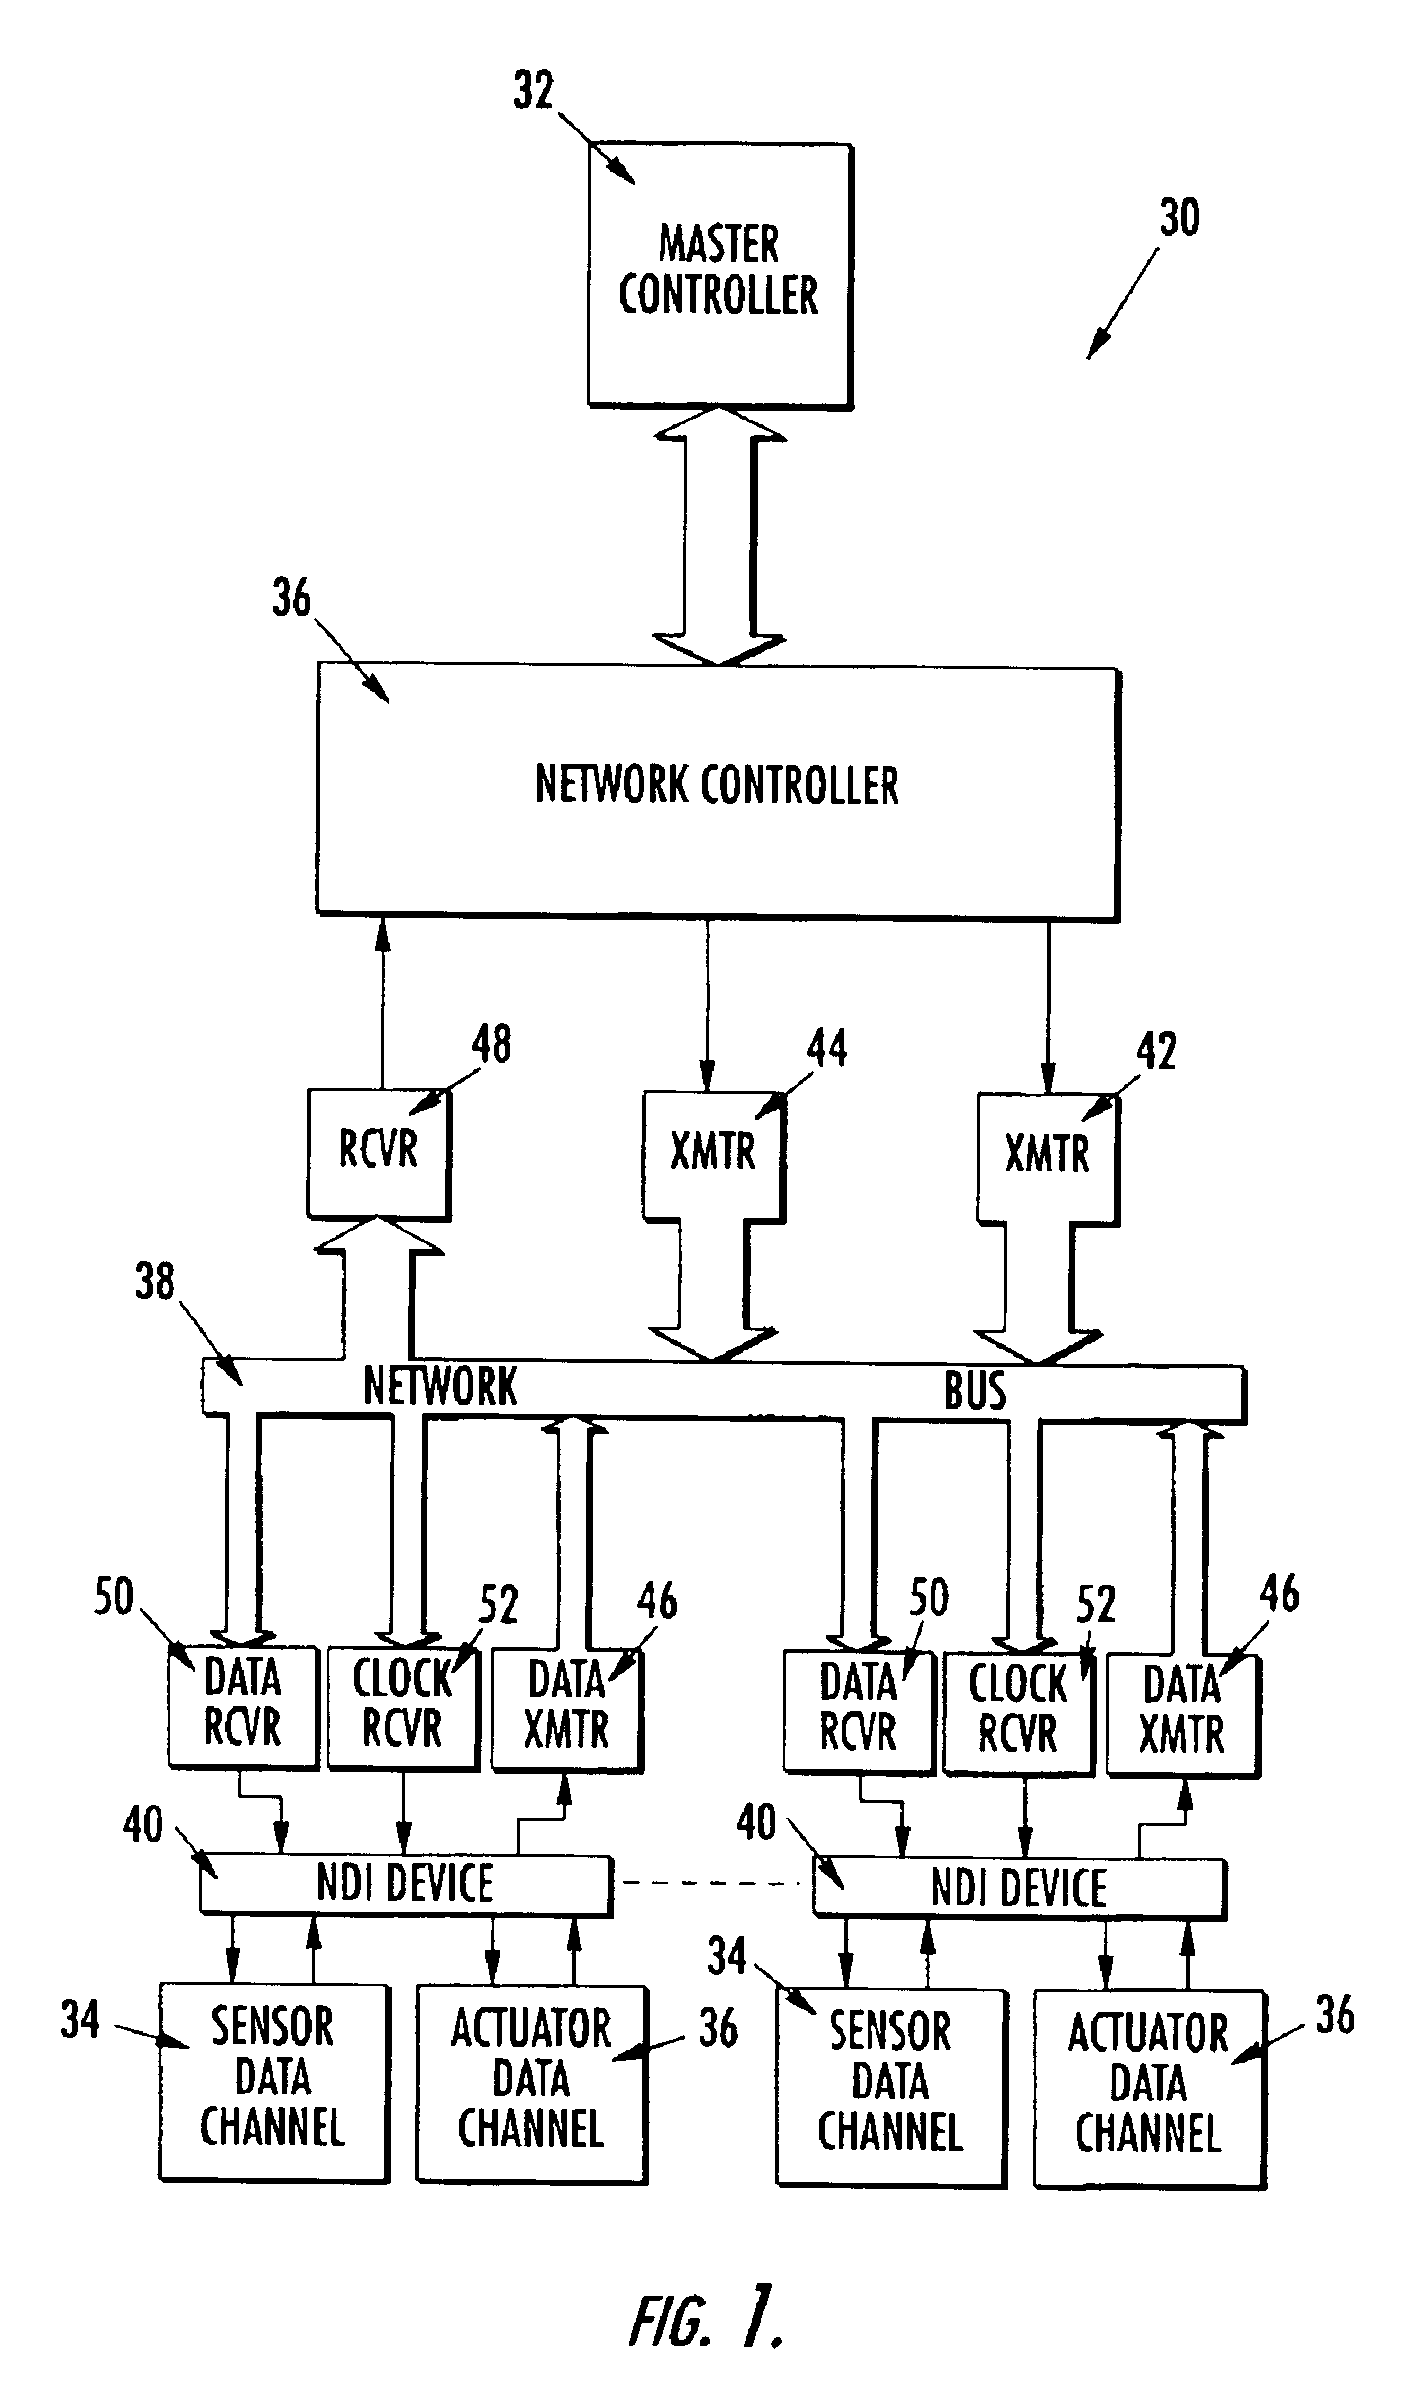 Network device interface for digitally interfacing data channels to a controller via a network